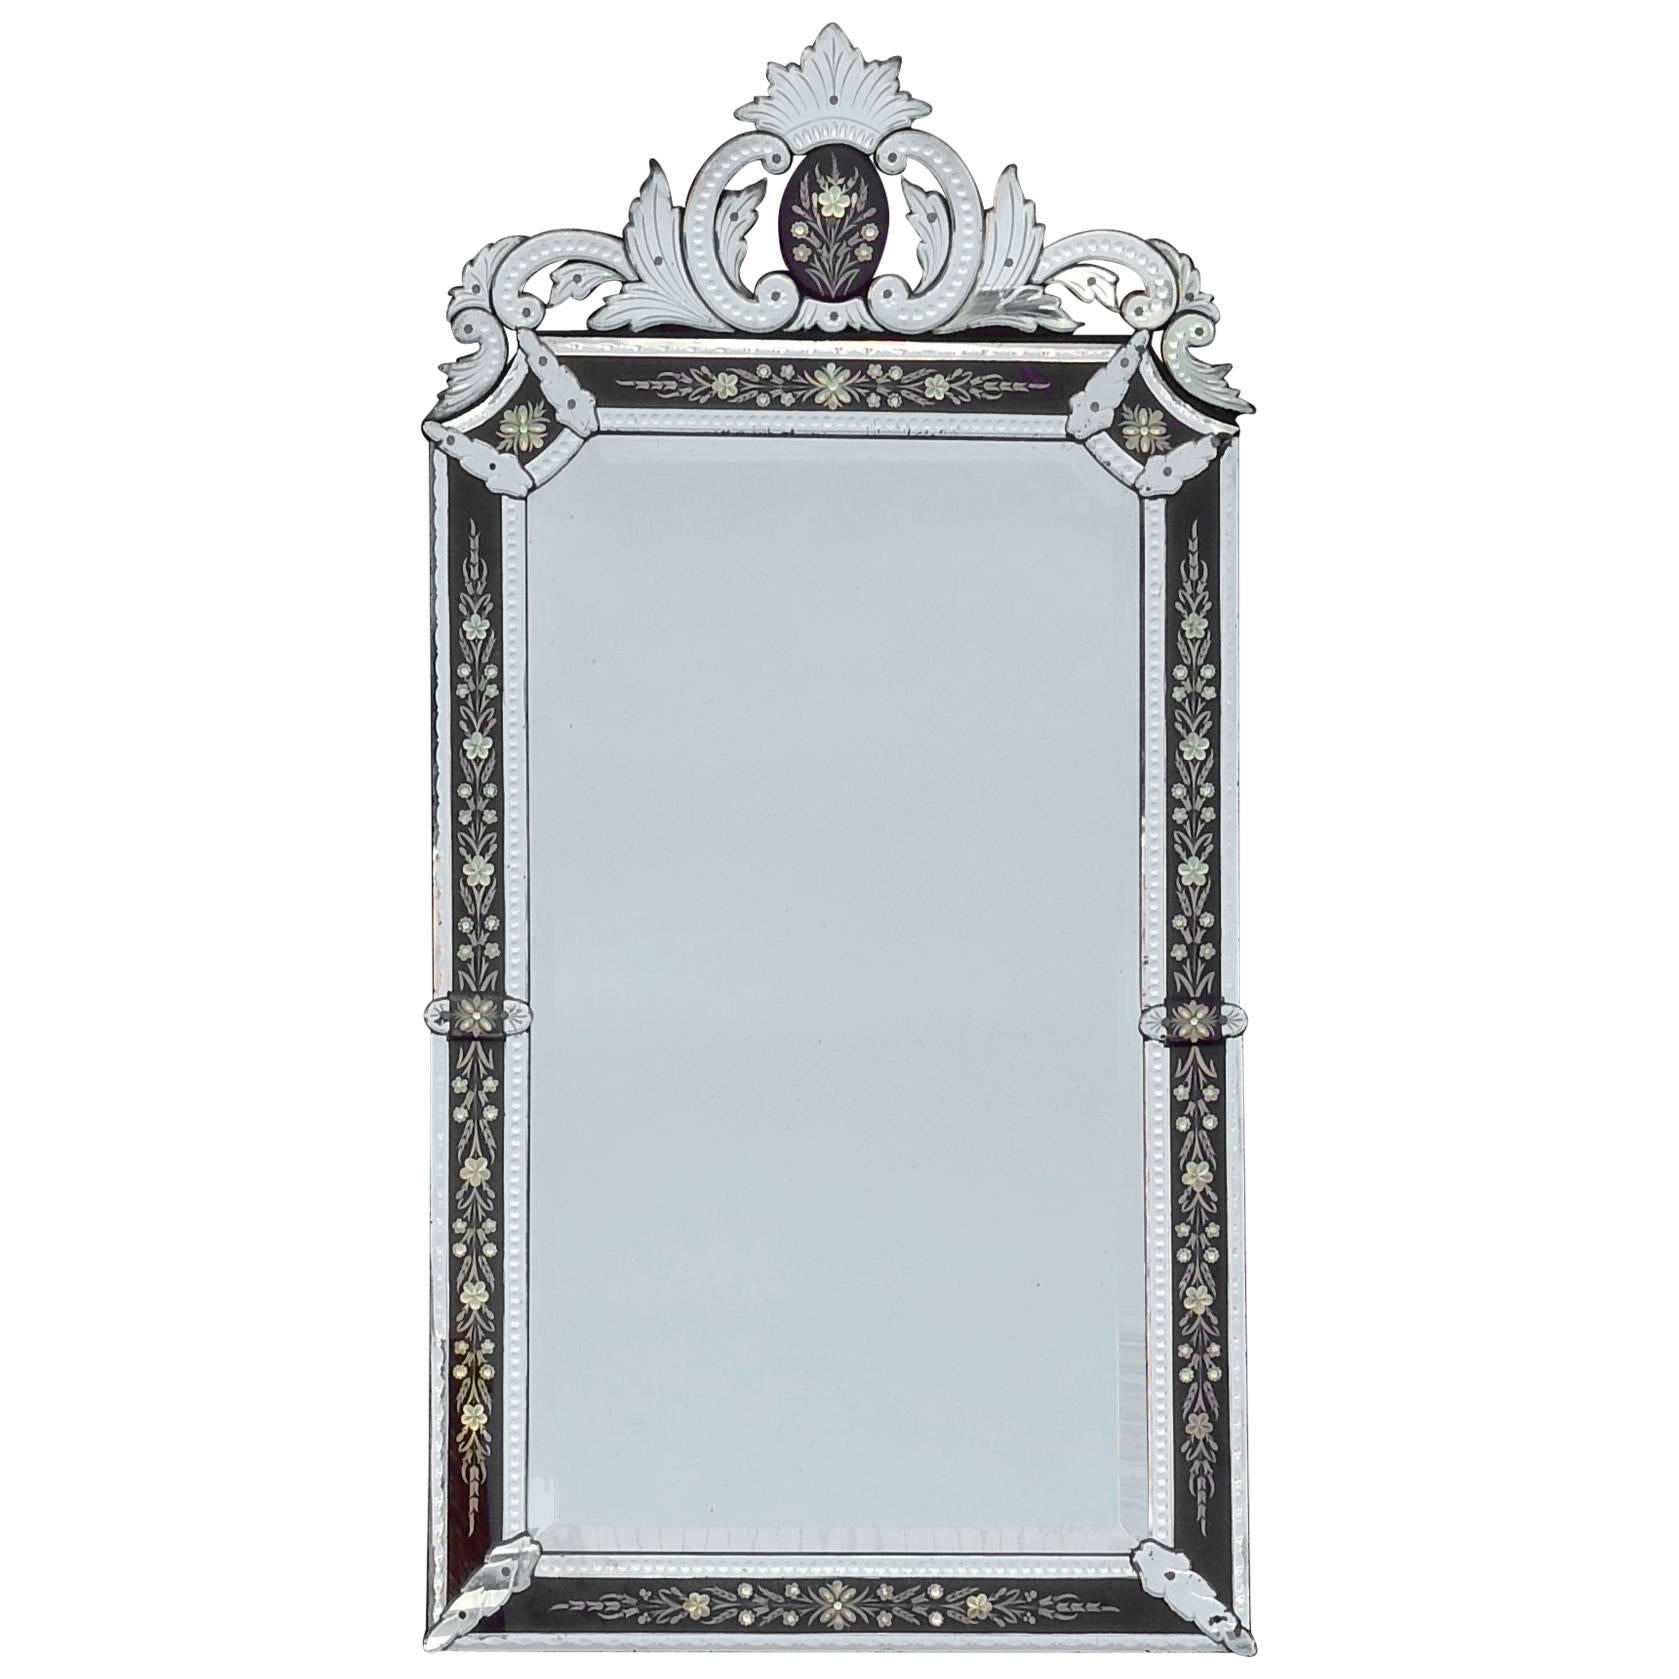 Venitian Mirror Napoleon III Has Front Wall with Colored Red Frame, 1880-1900